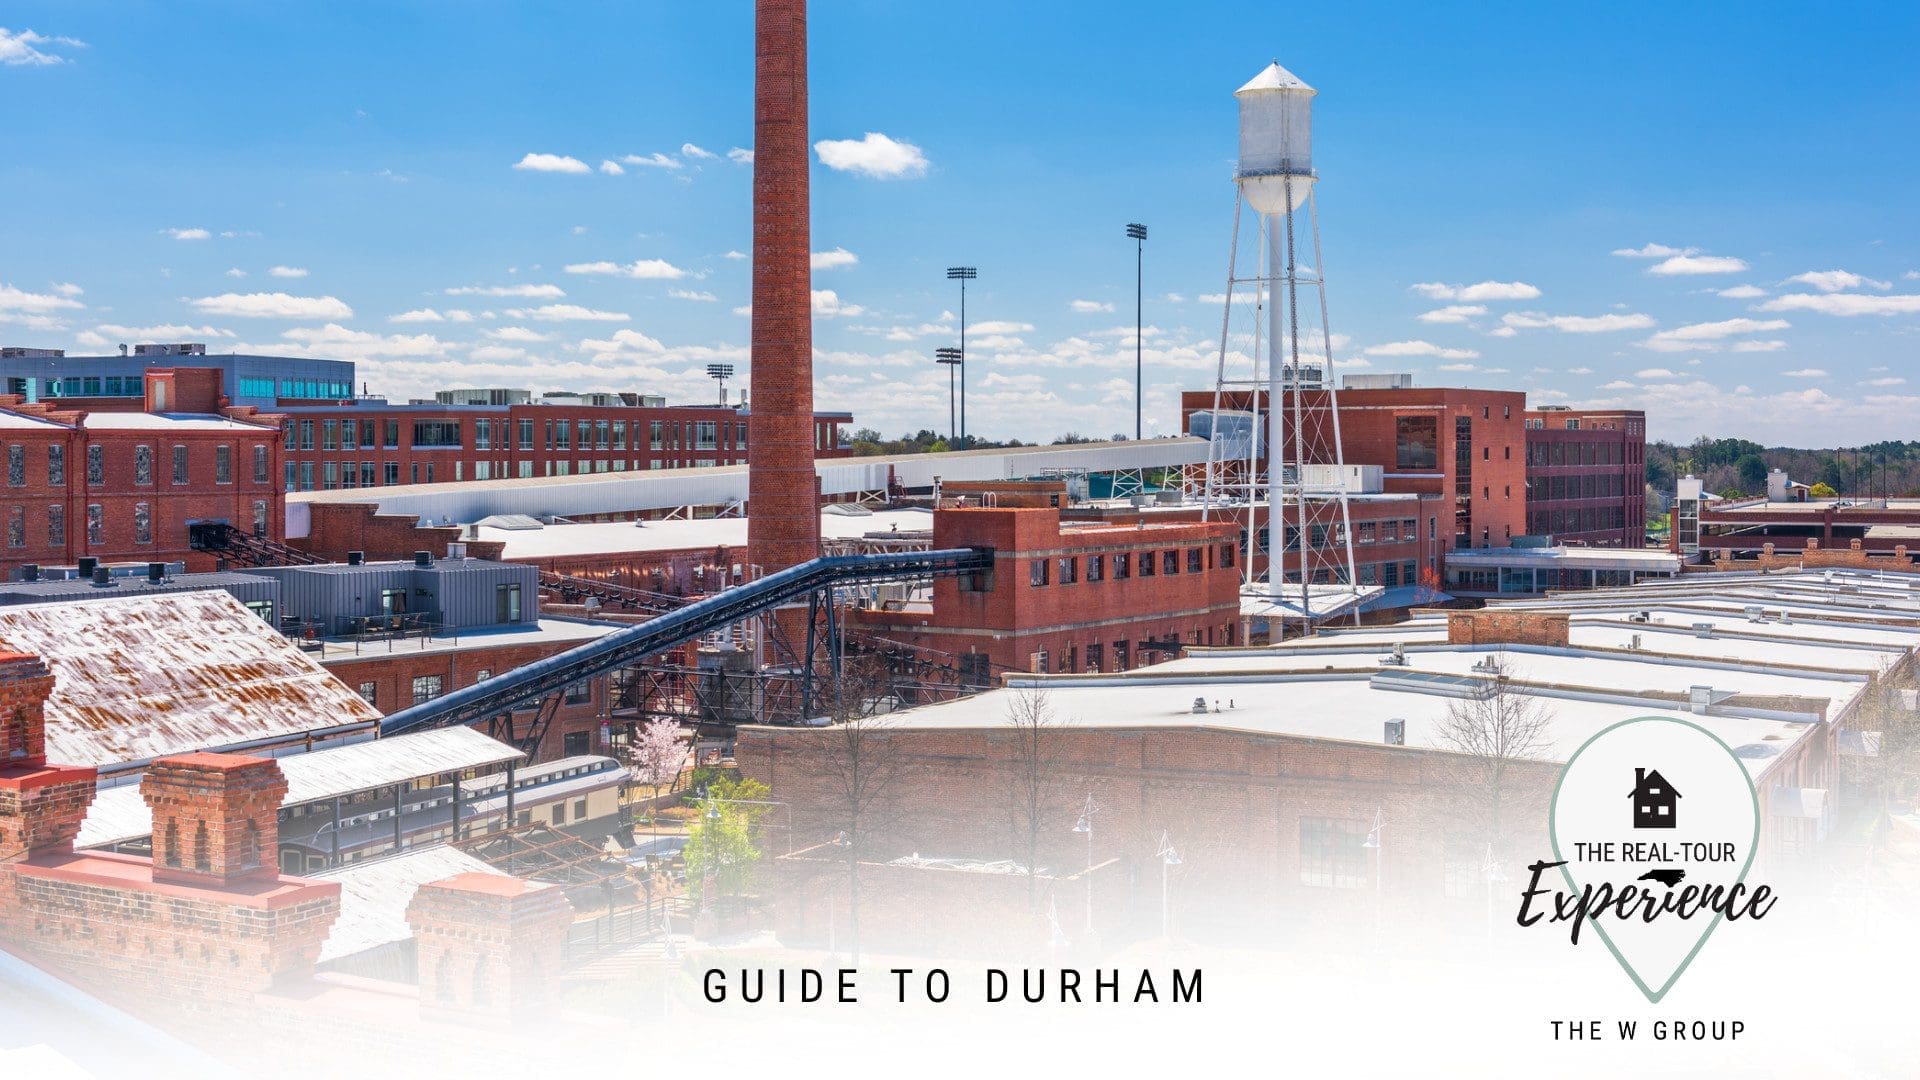 Guide to Durham